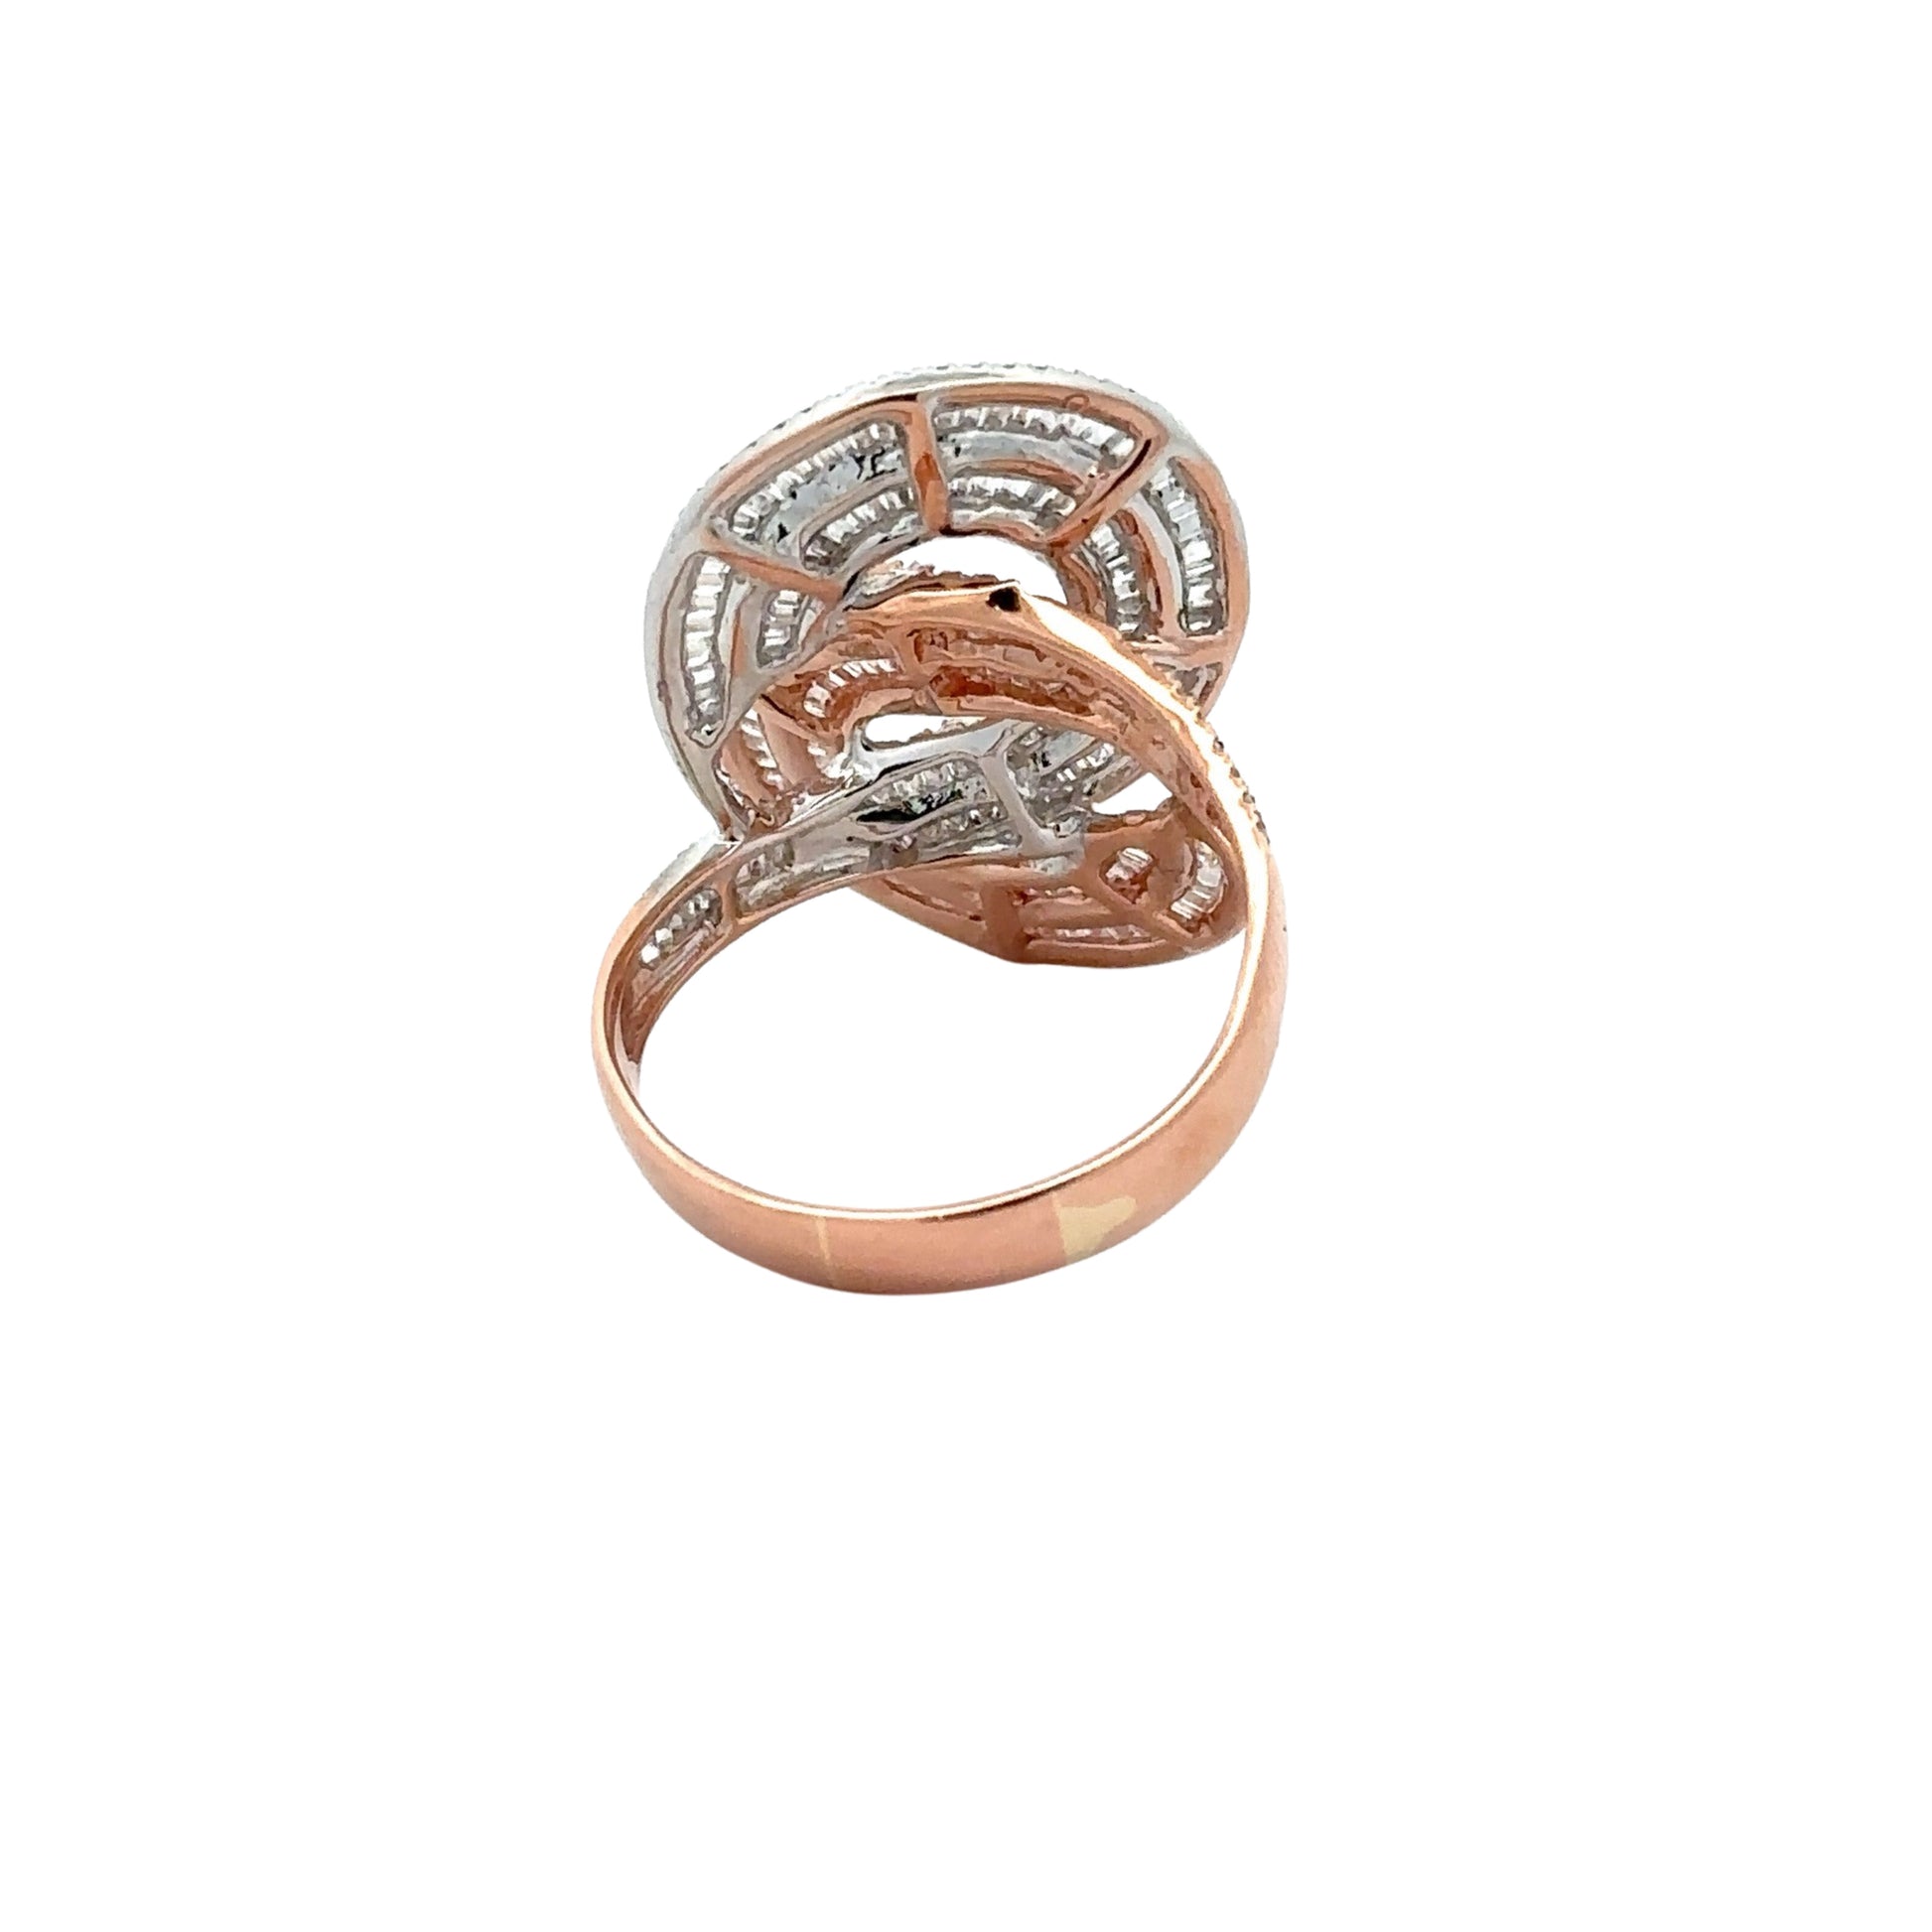 Bottom of ring with rose gold band. There are 2 marks on bottom of ring (as pictured)